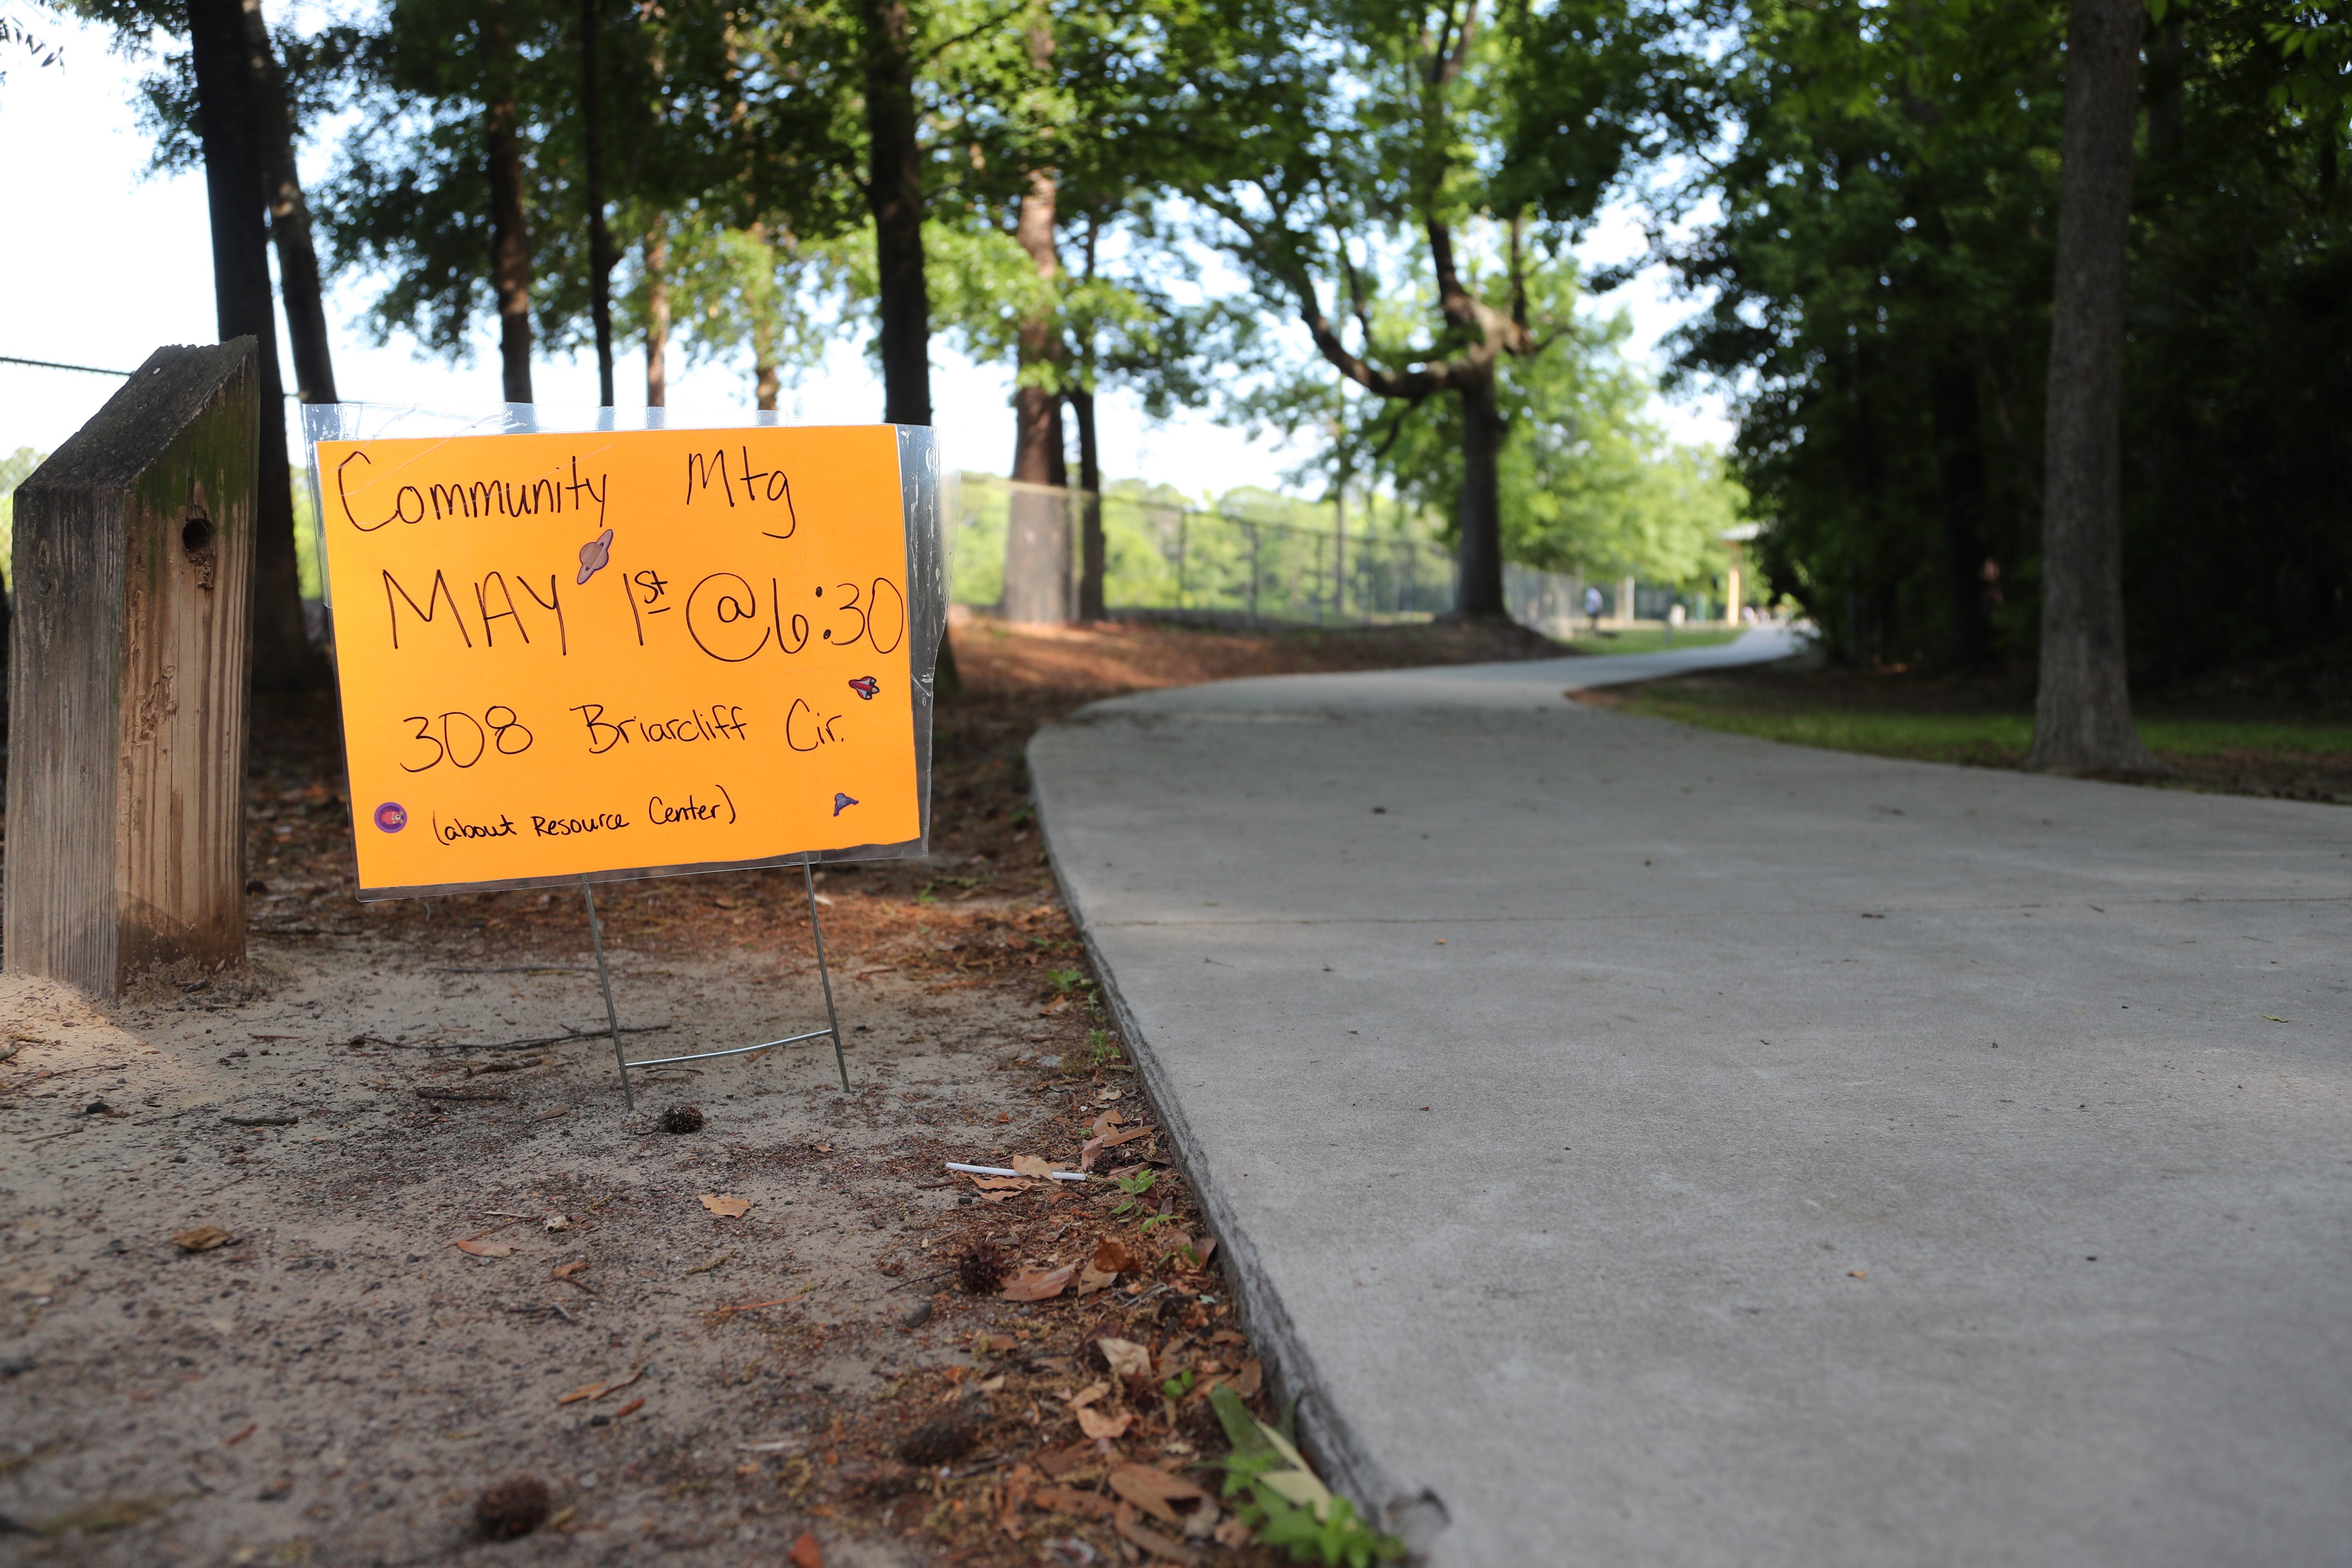 Savannah's southside is set for a new community center. Residents are split on a location